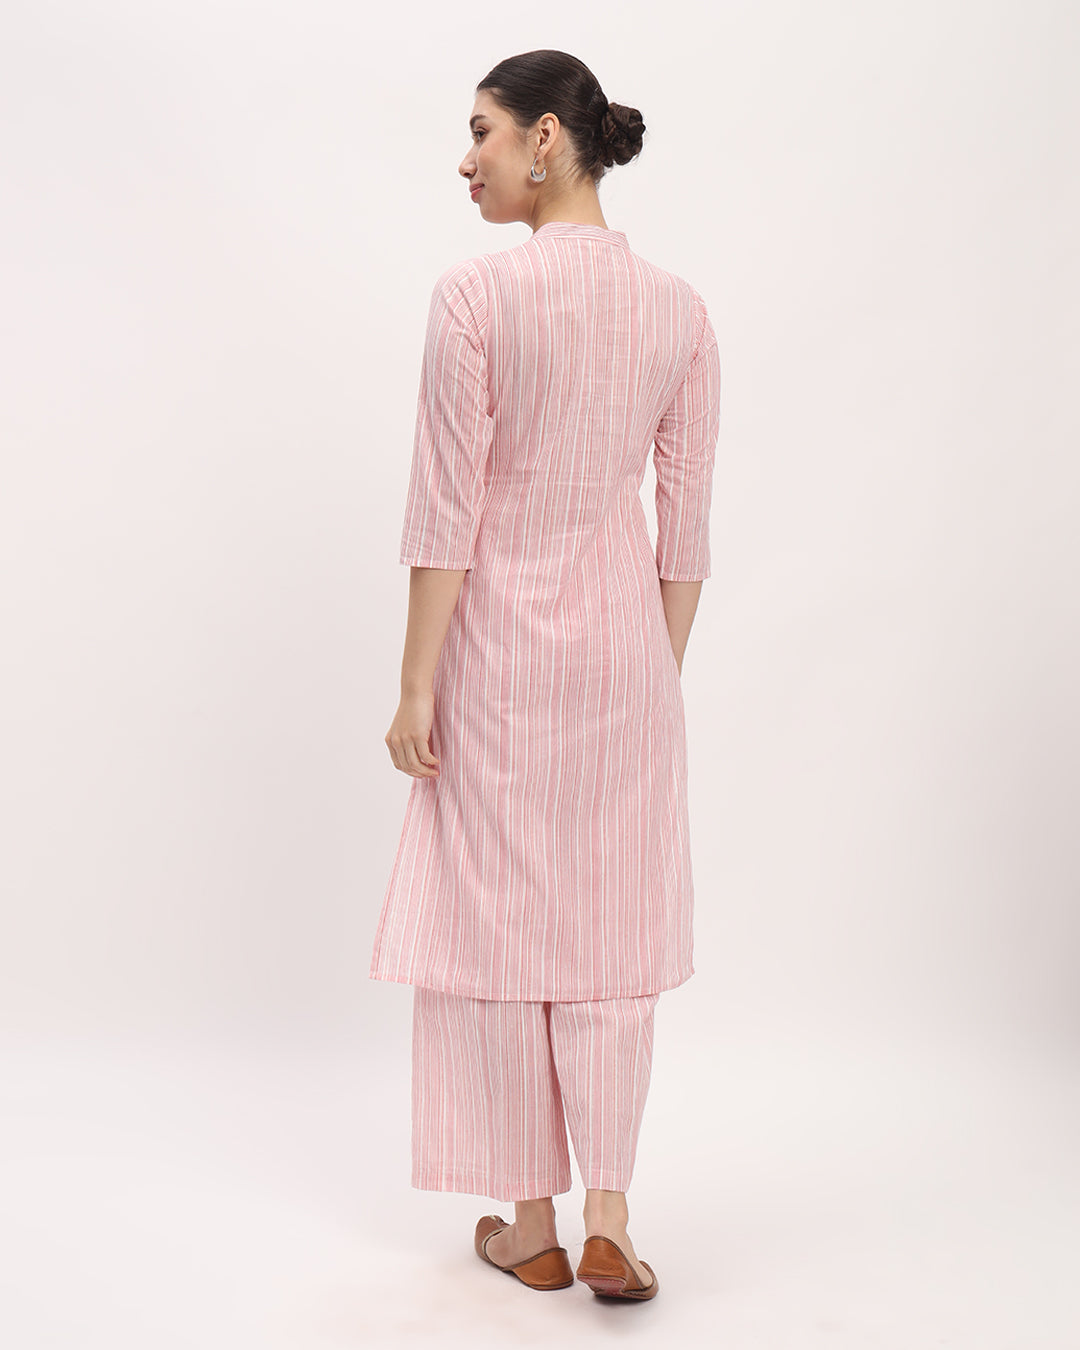 Copy of Combo: Ivory Quadrangle & Pink Chic Lines High-Low Printed Kurta (Without Bottoms)